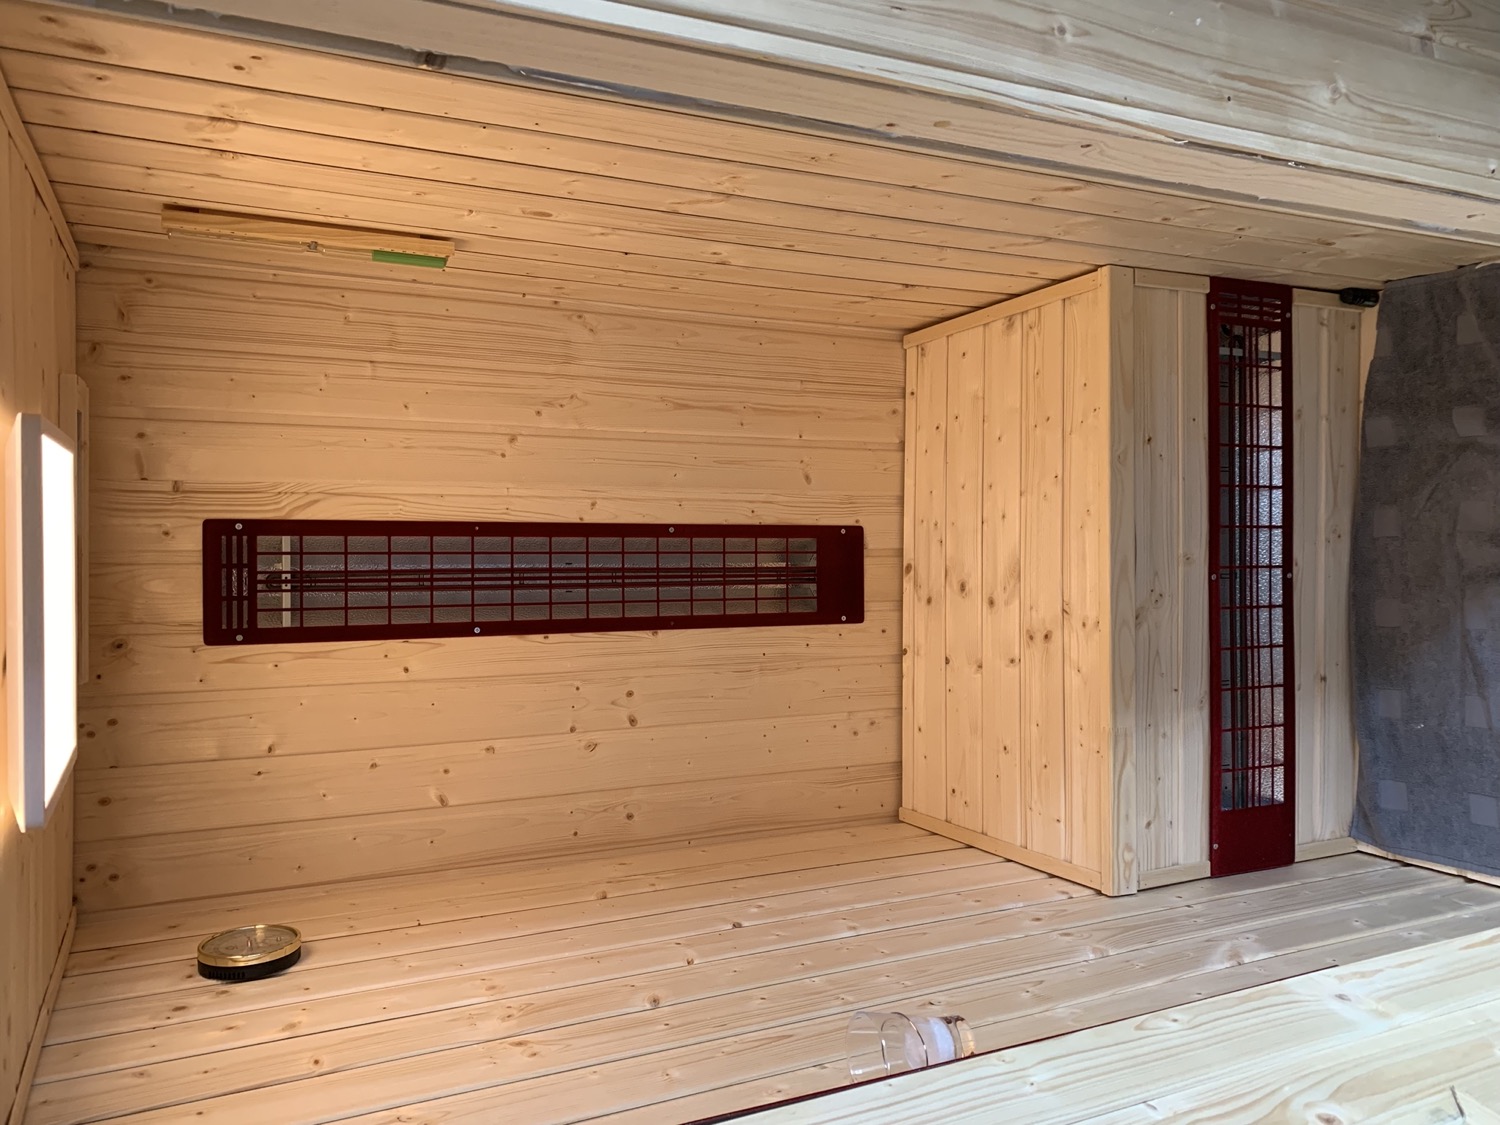 The inside of my infrared sauna.